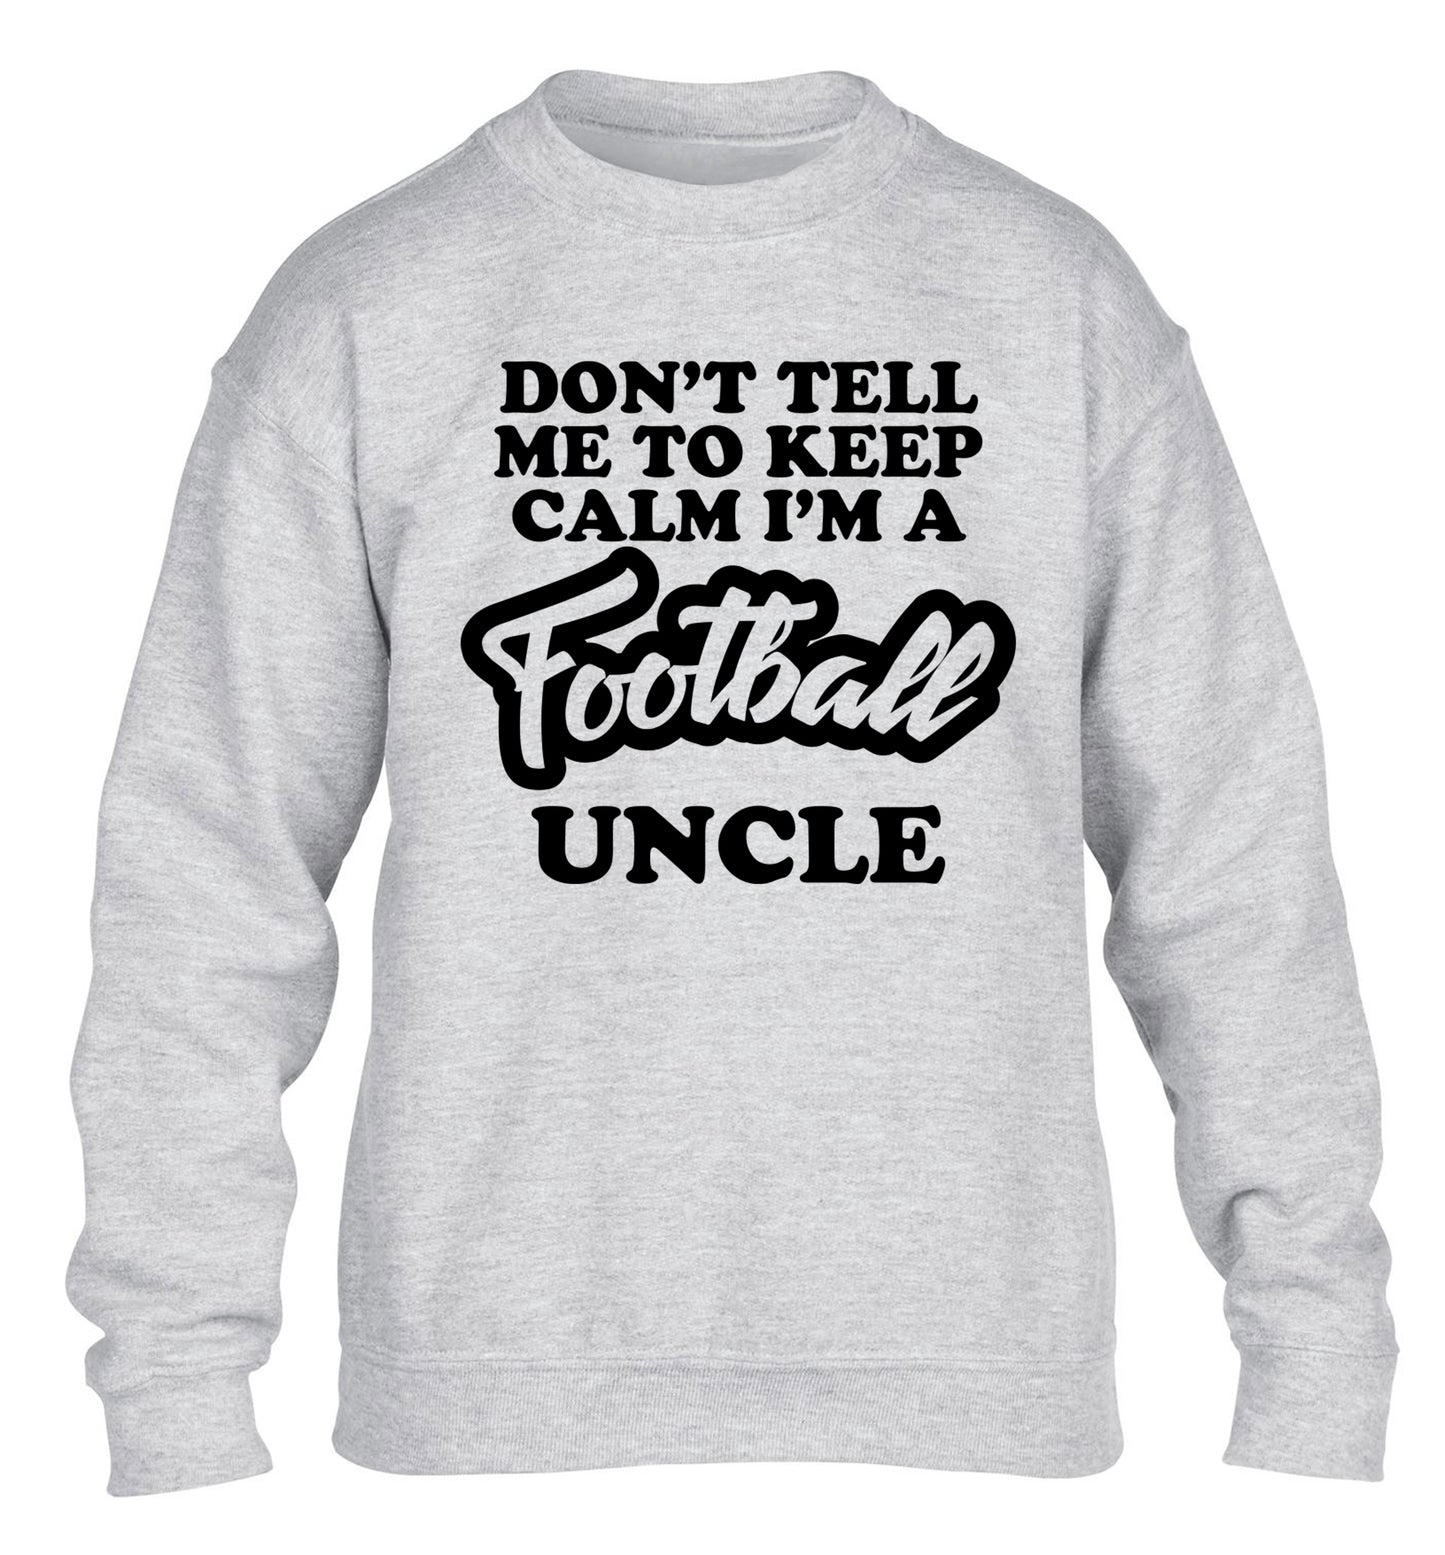 Worlds most amazing football uncle children's grey sweater 12-14 Years